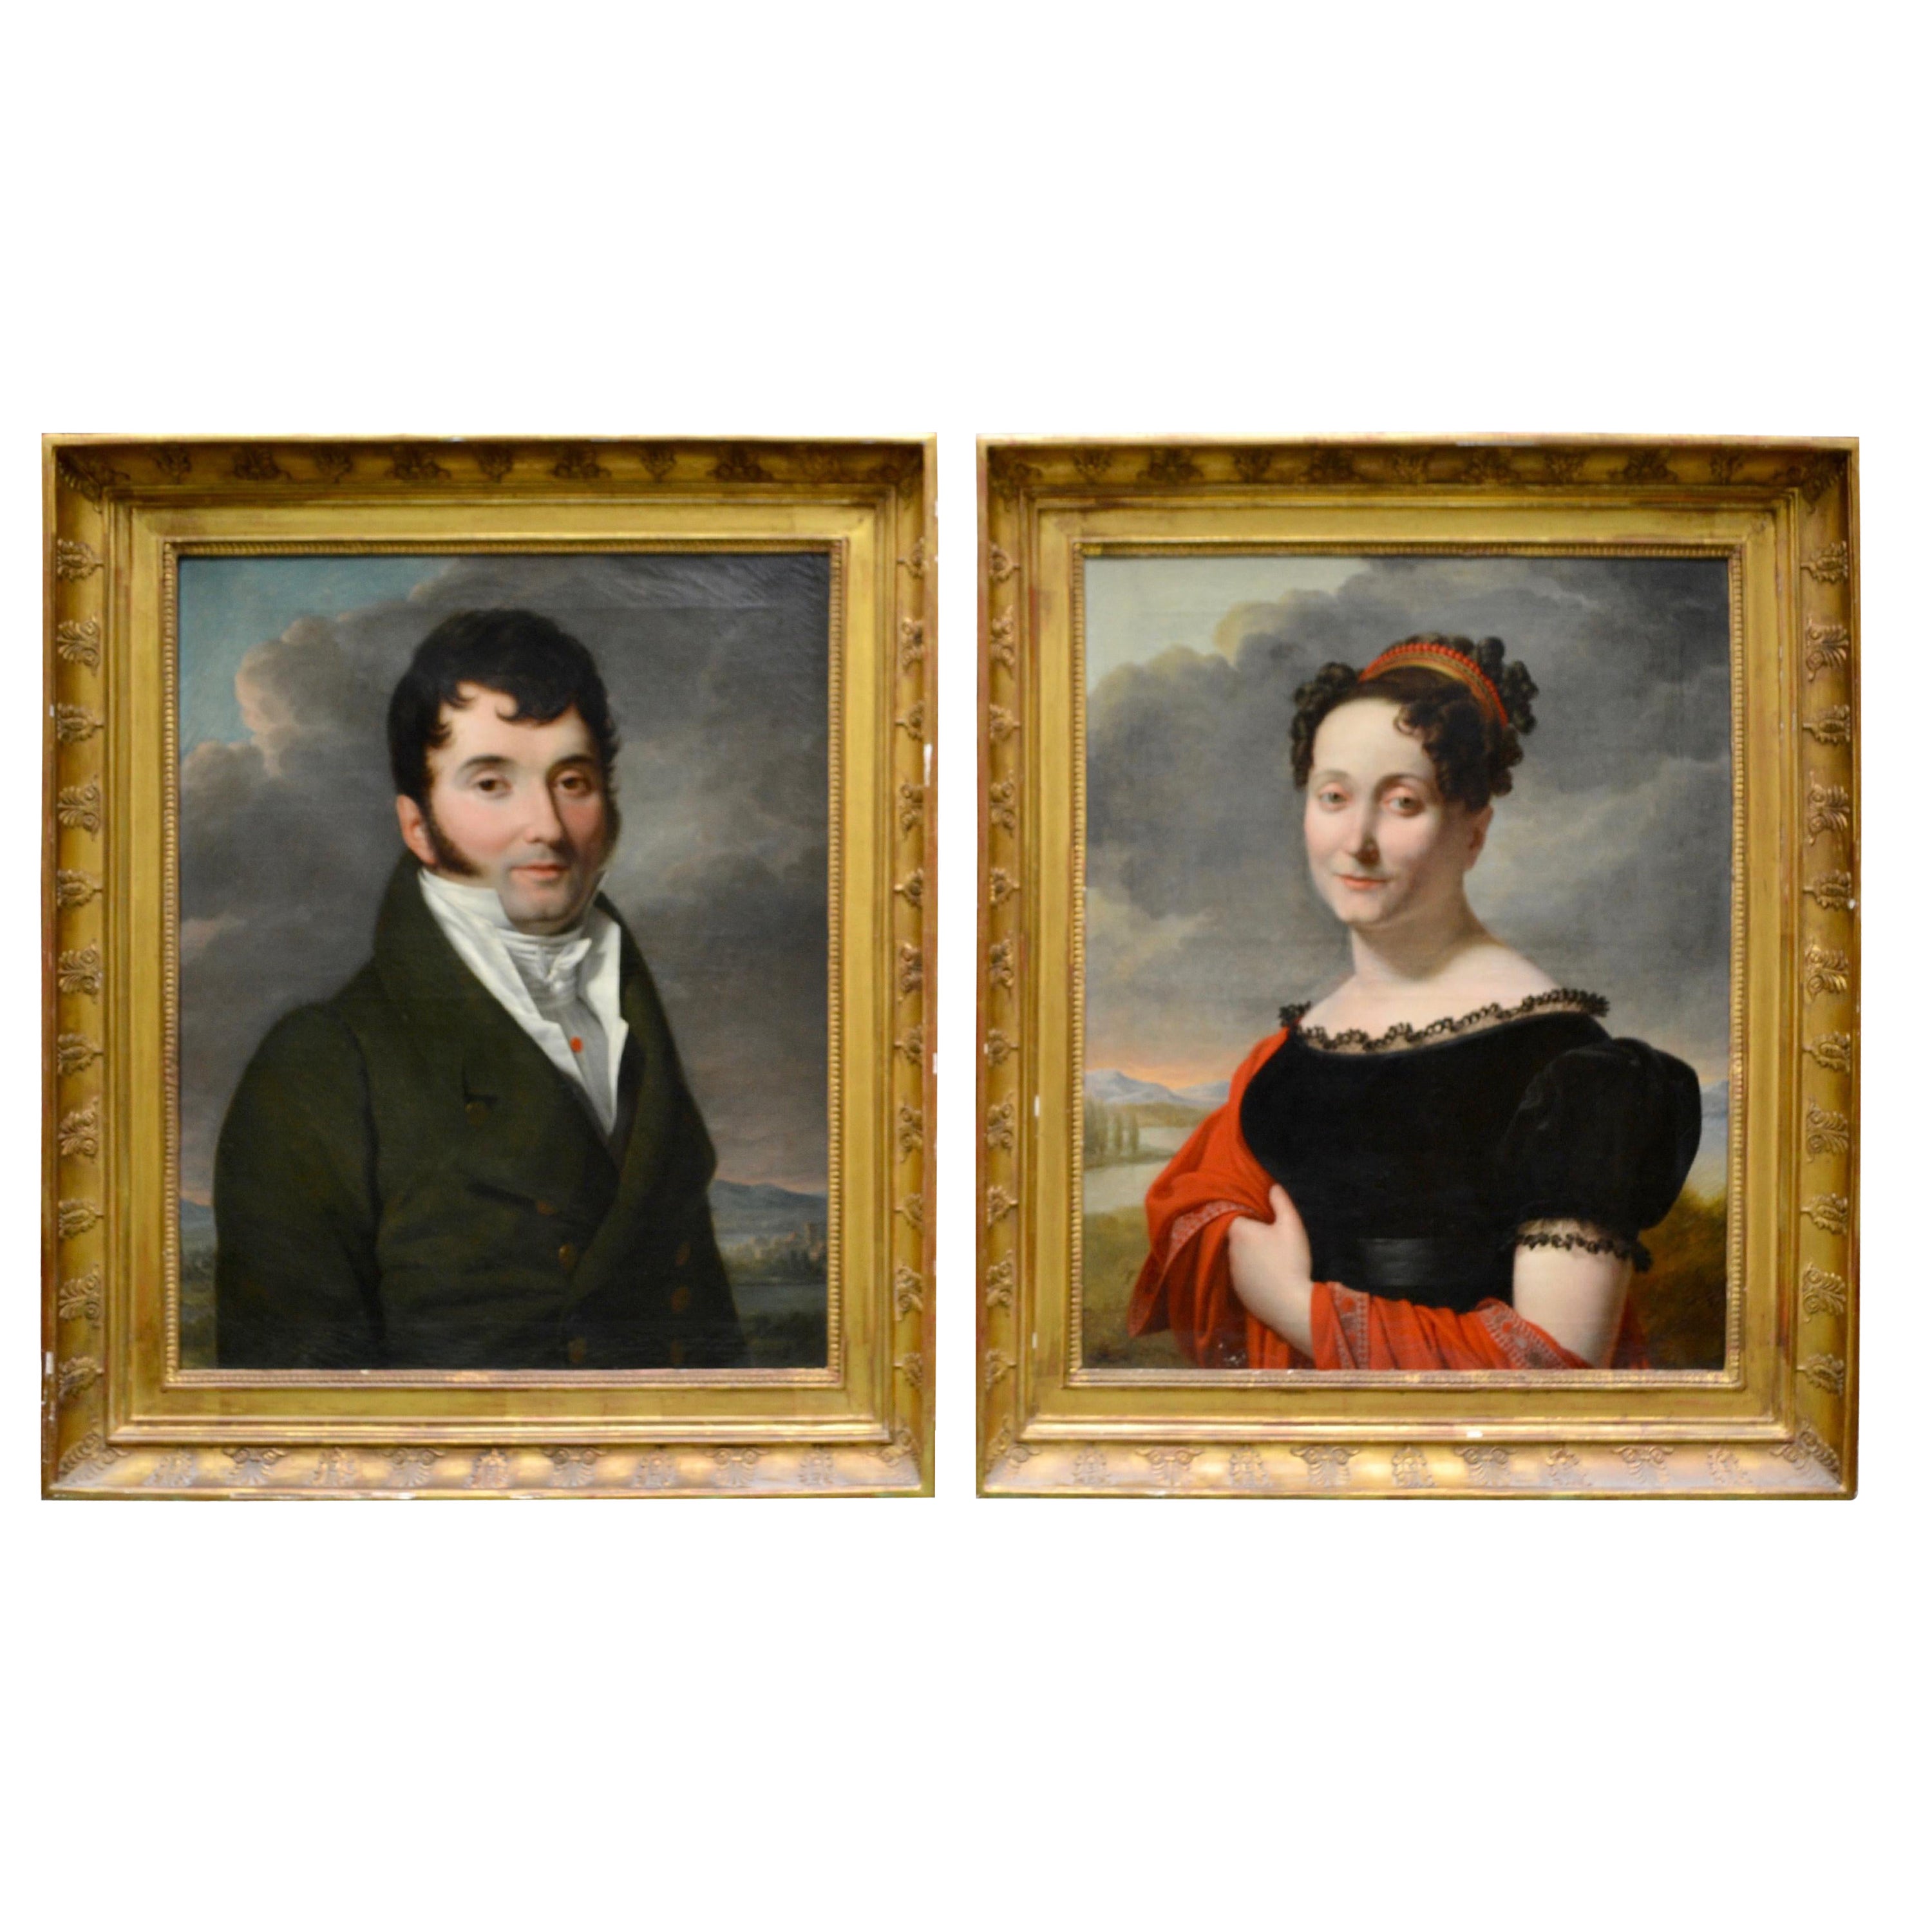 Pair of French Empire Portraits of an Aristocratic Couple by Antoine Borel